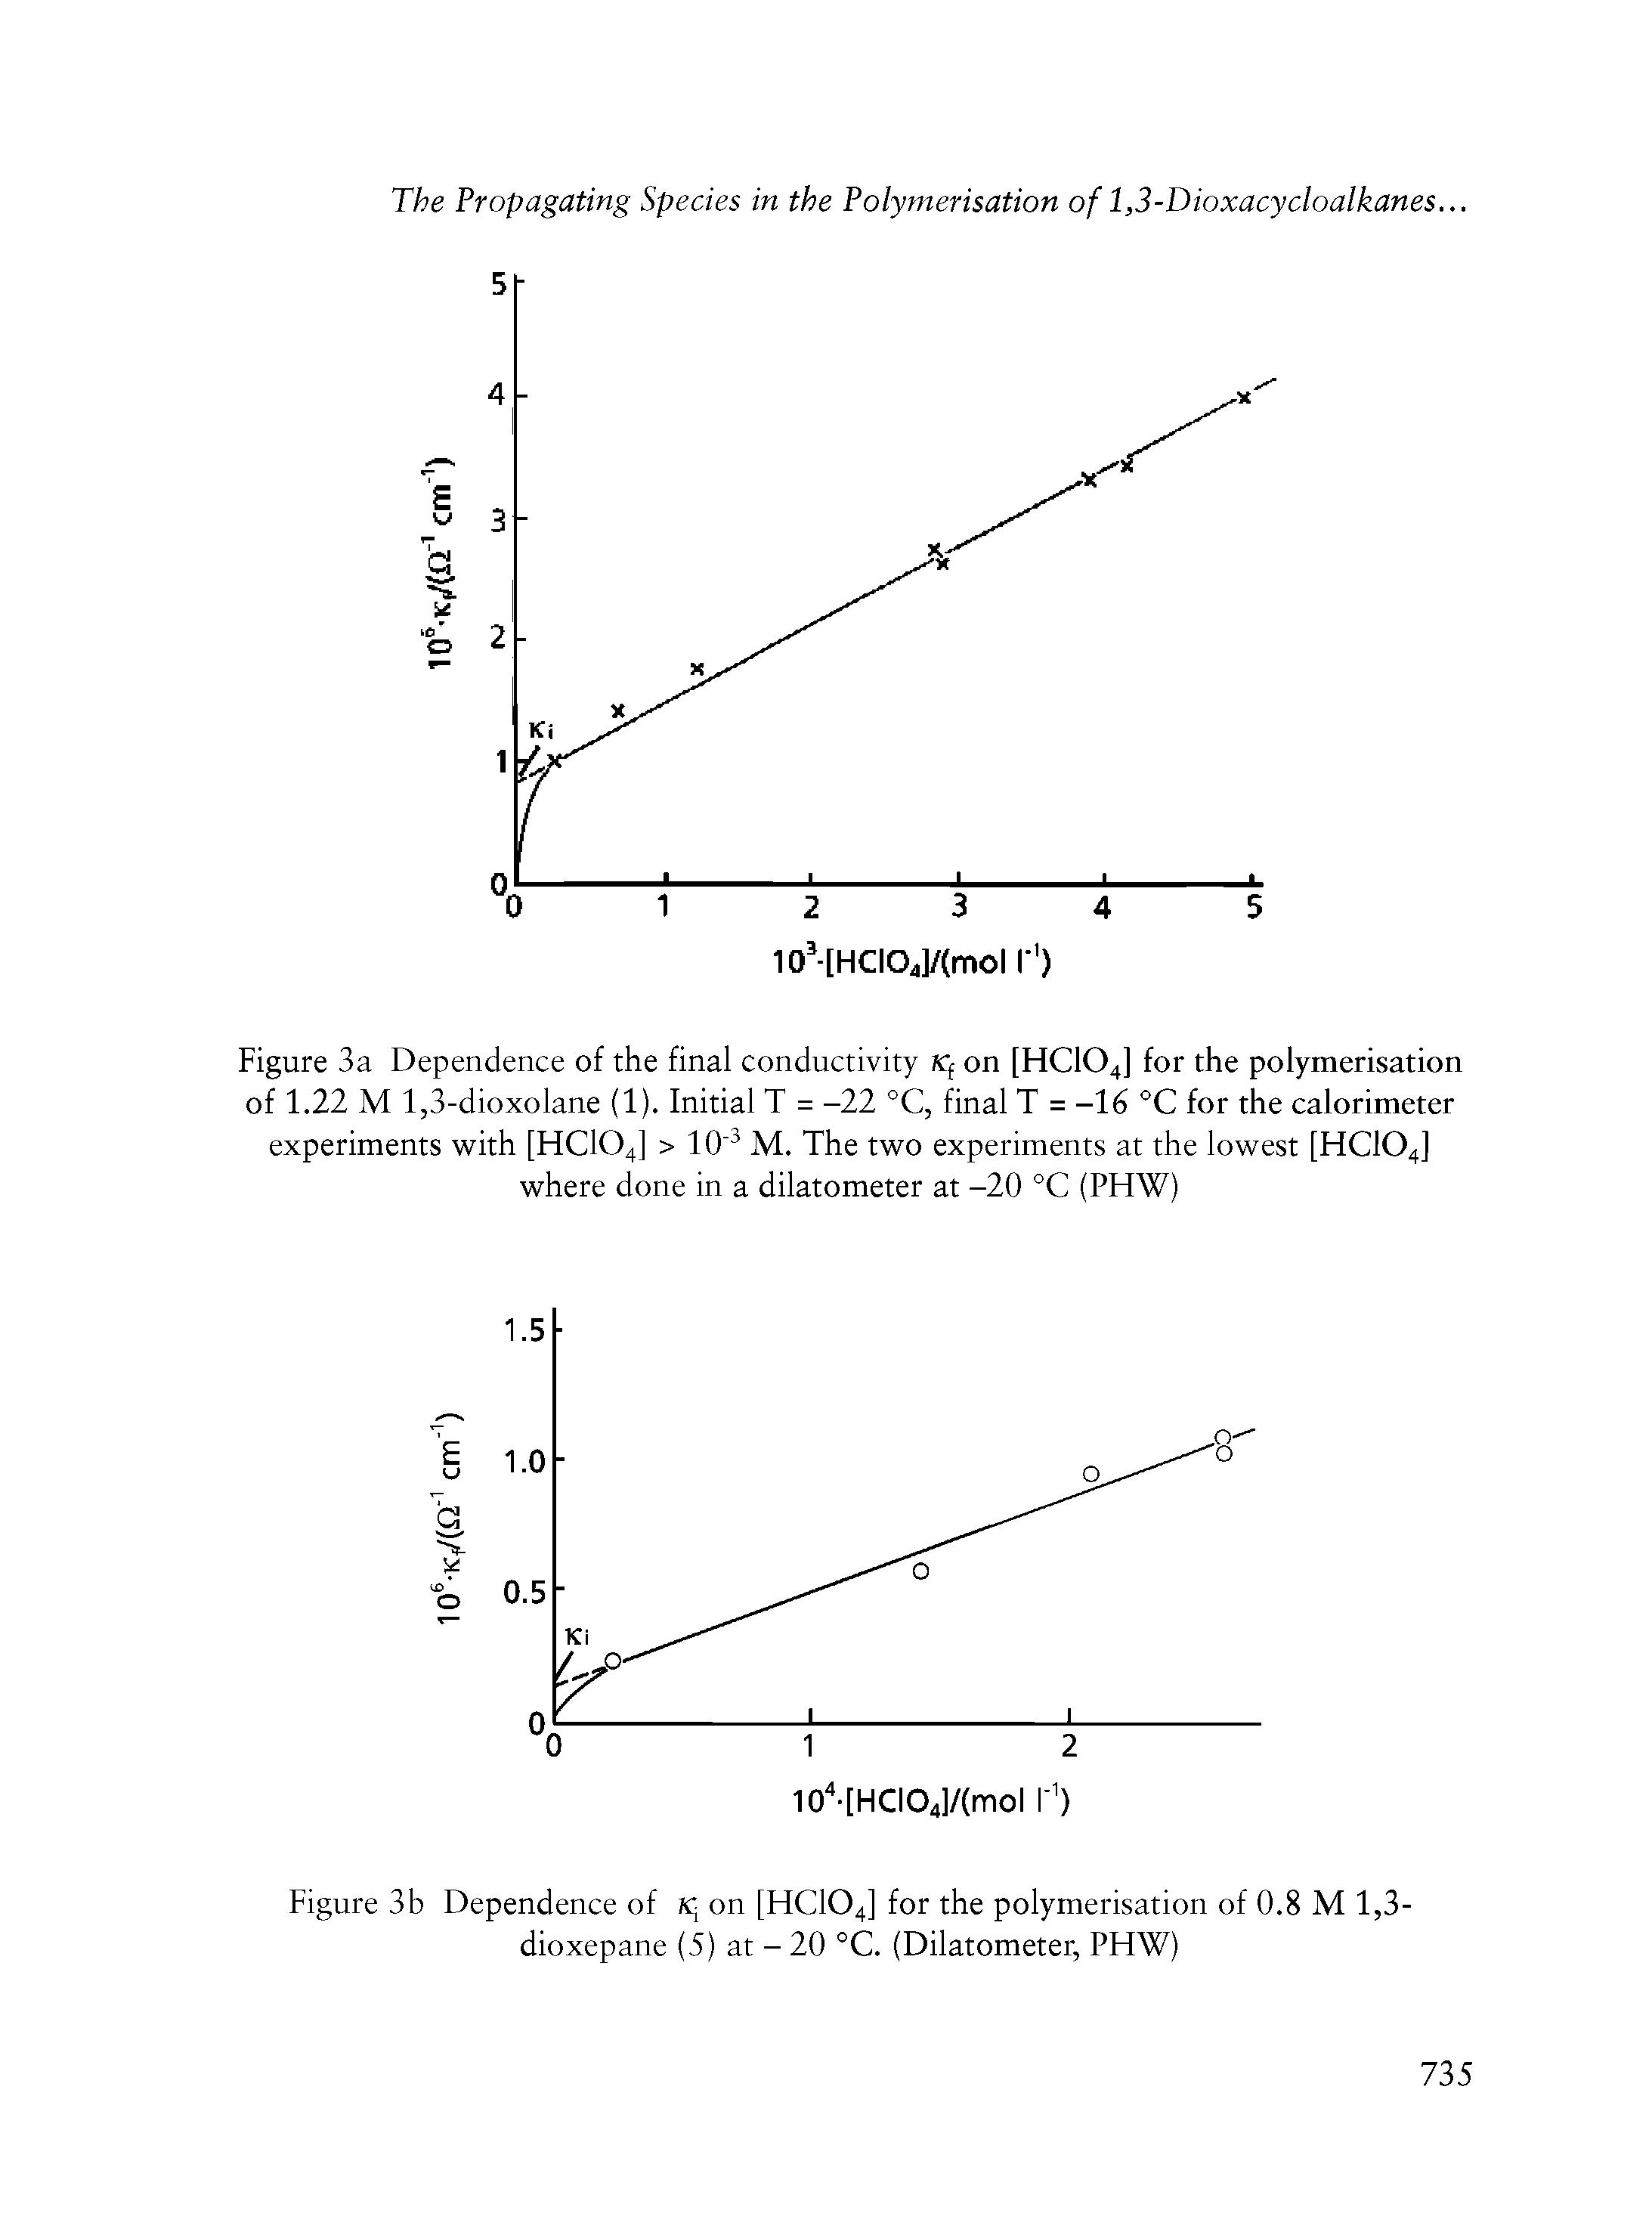 Figure 3a Dependence of the final conductivity k( on [HC104] for the polymerisation of 1.22 M 1,3-dioxolane (1). Initial T = -22 °C, final T = -16 °C for the calorimeter experiments with [HC104] > 10"3 M. The two experiments at the lowest [HC104] where done in a dilatometer at -20 °C (PHW)...